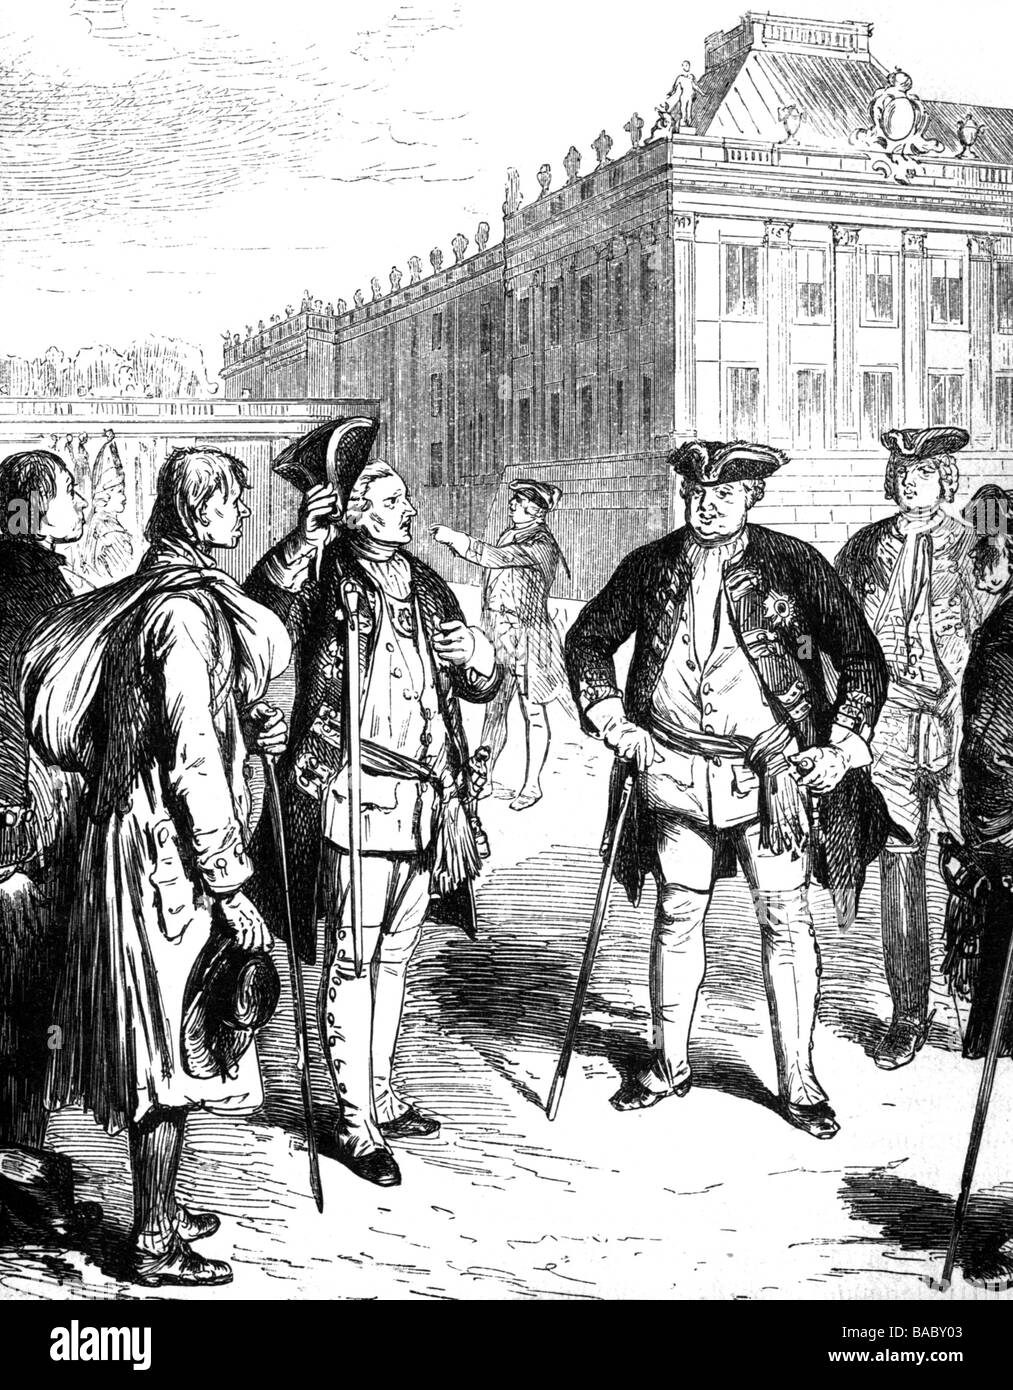 Frederick William I, 14.8.1688 - 31.5.1740, King in Prussia 25.2.1713 - 31.5.1740, inspecting inductees for his Potsdam Giants, wood engraving, after drawing by Ludwig Burger (1825 - 1884), Stock Photo